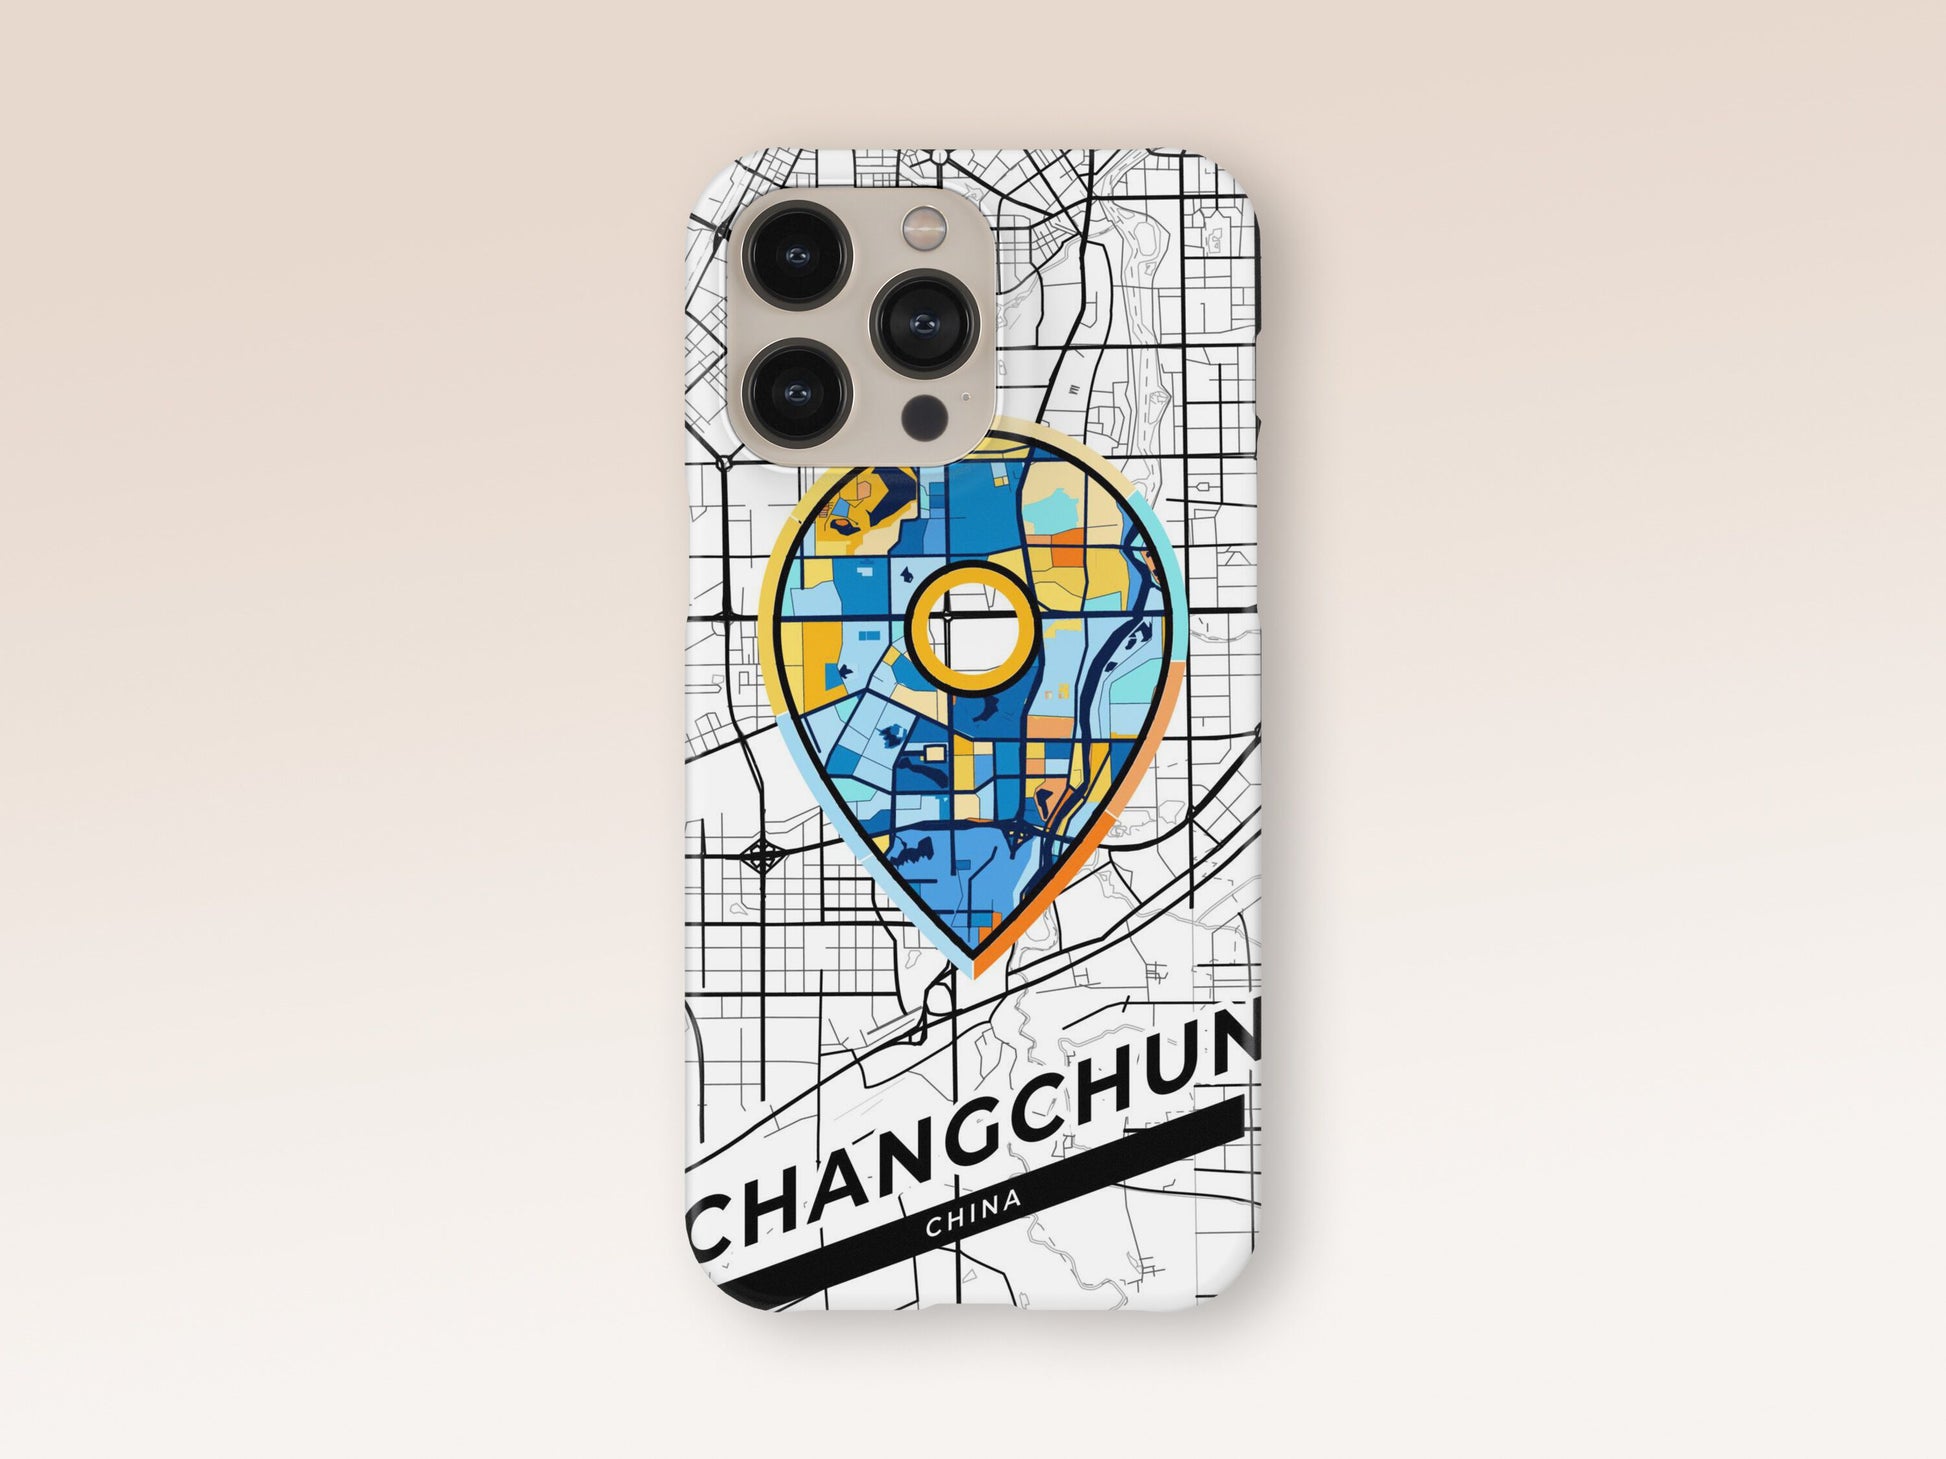 Changchun China slim phone case with colorful icon. Birthday, wedding or housewarming gift. Couple match cases. 1